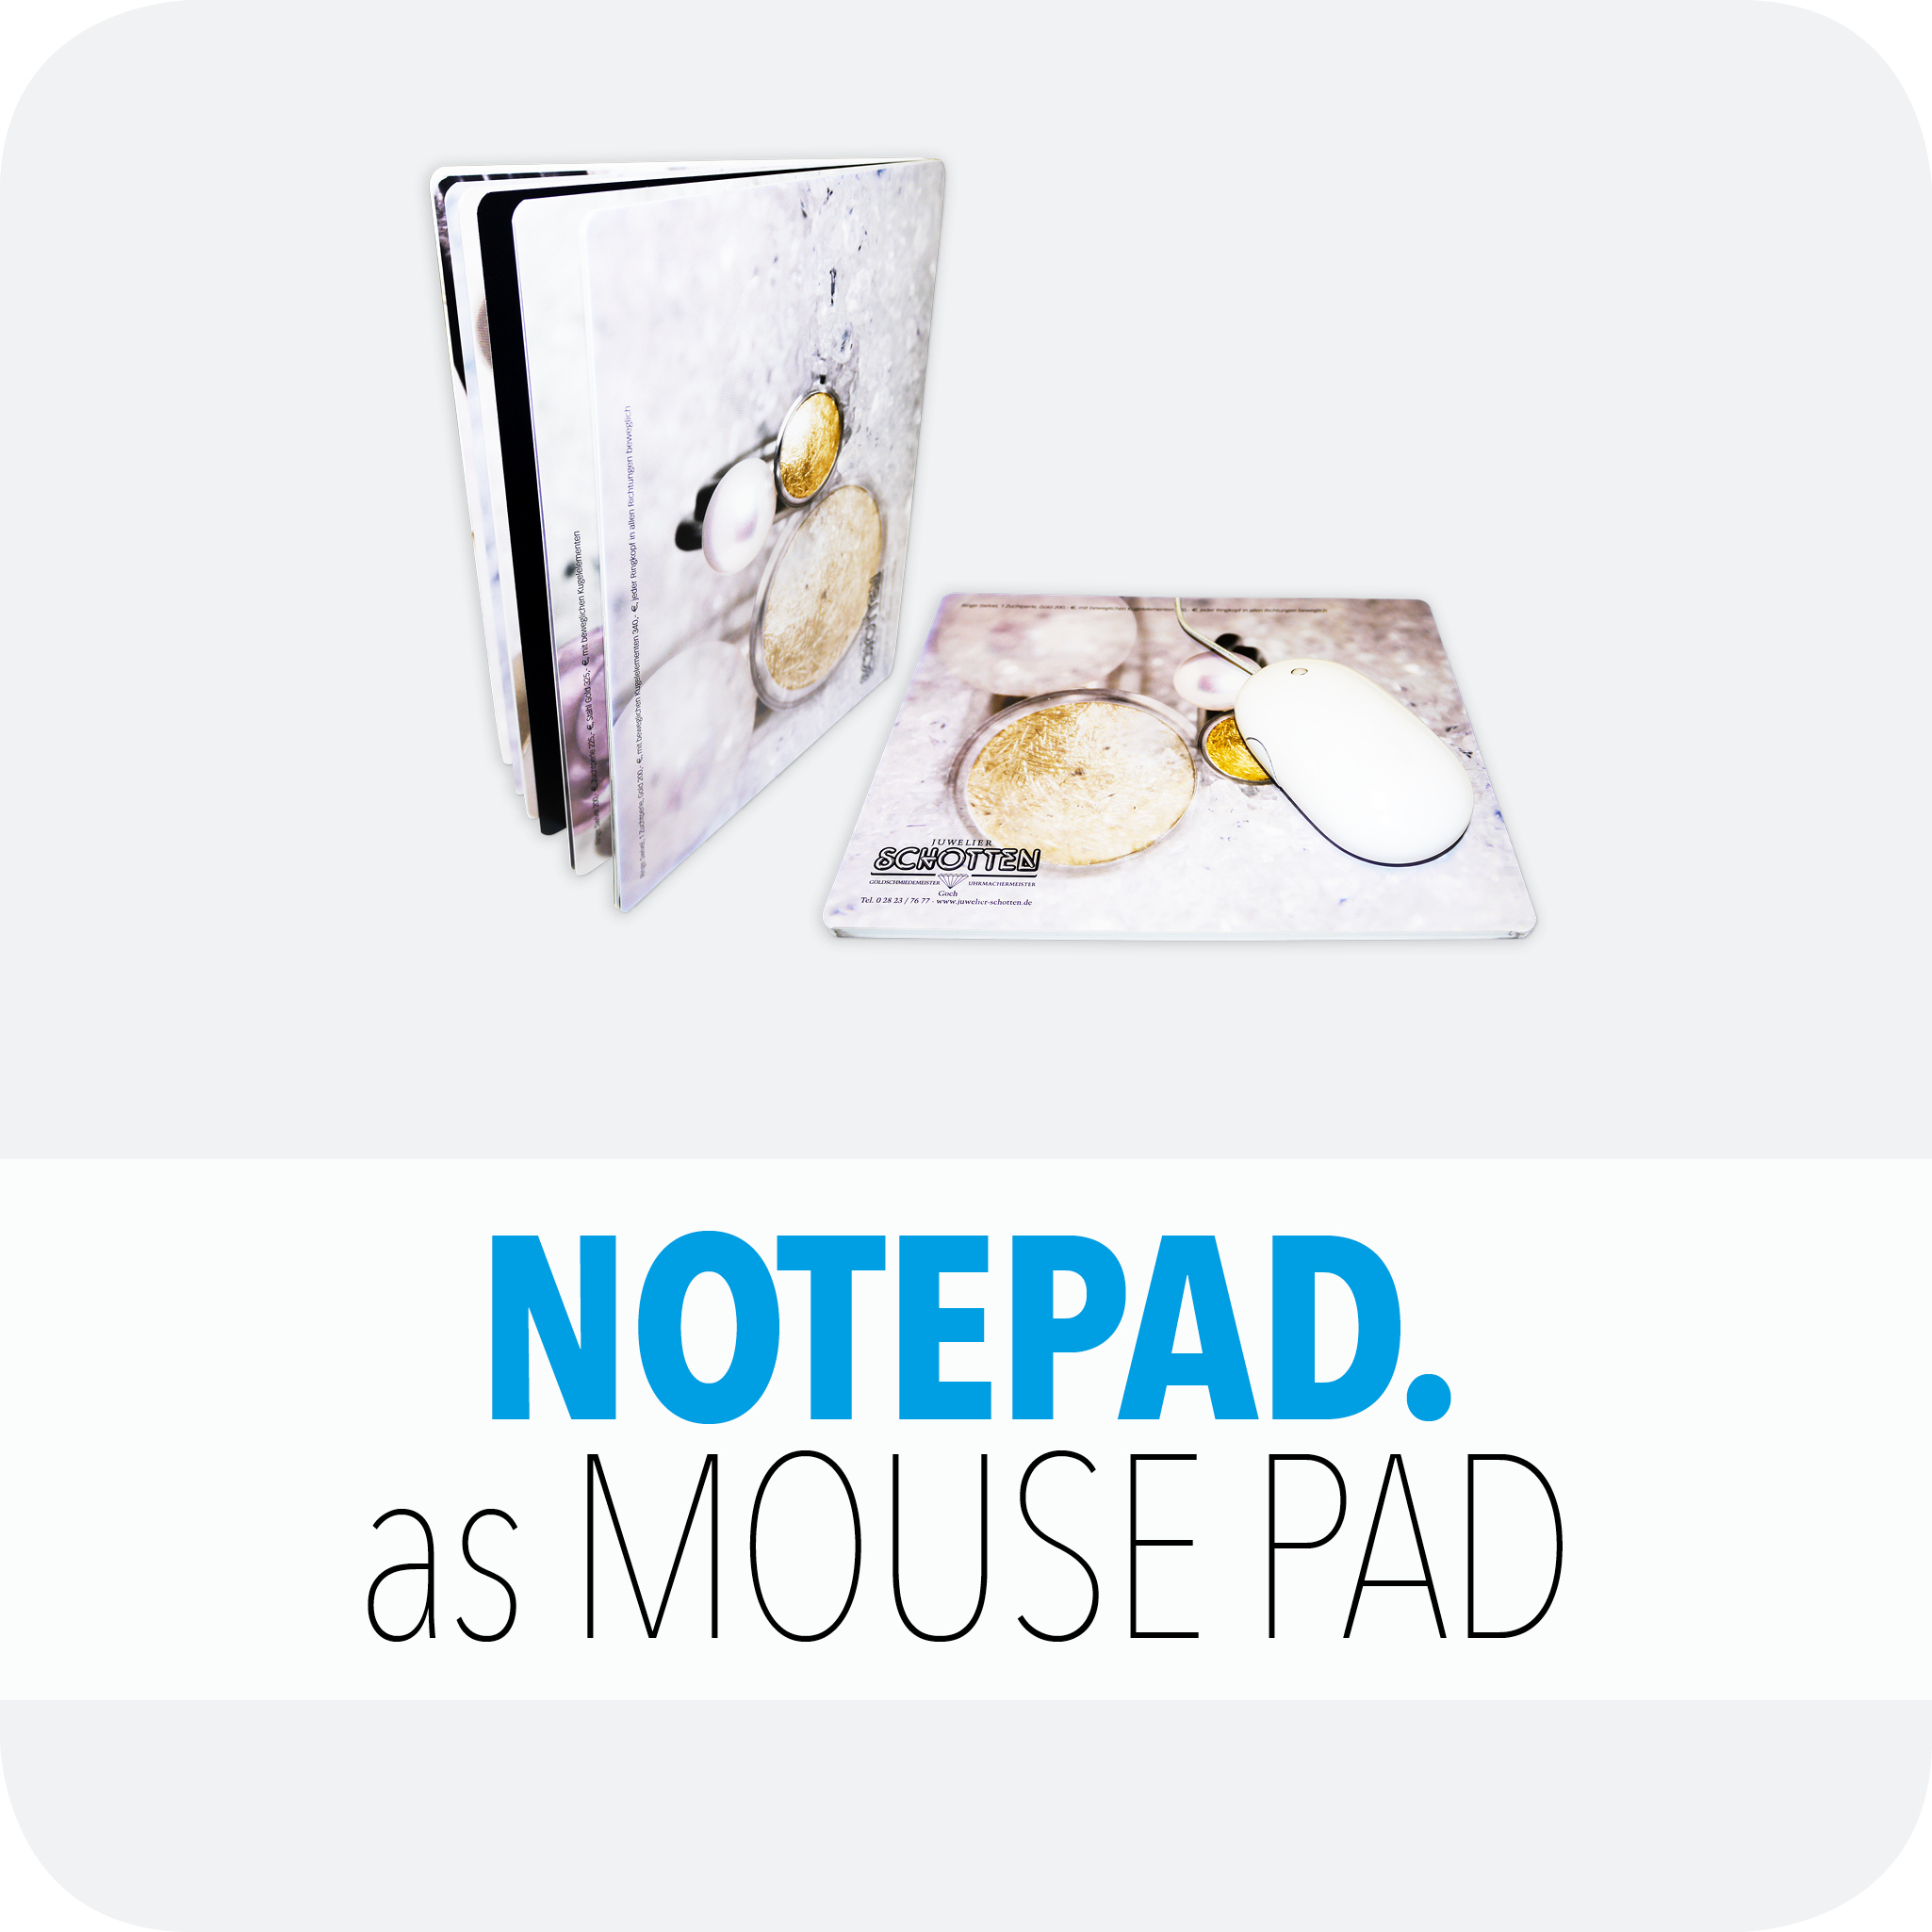 Notepad as mouse pad